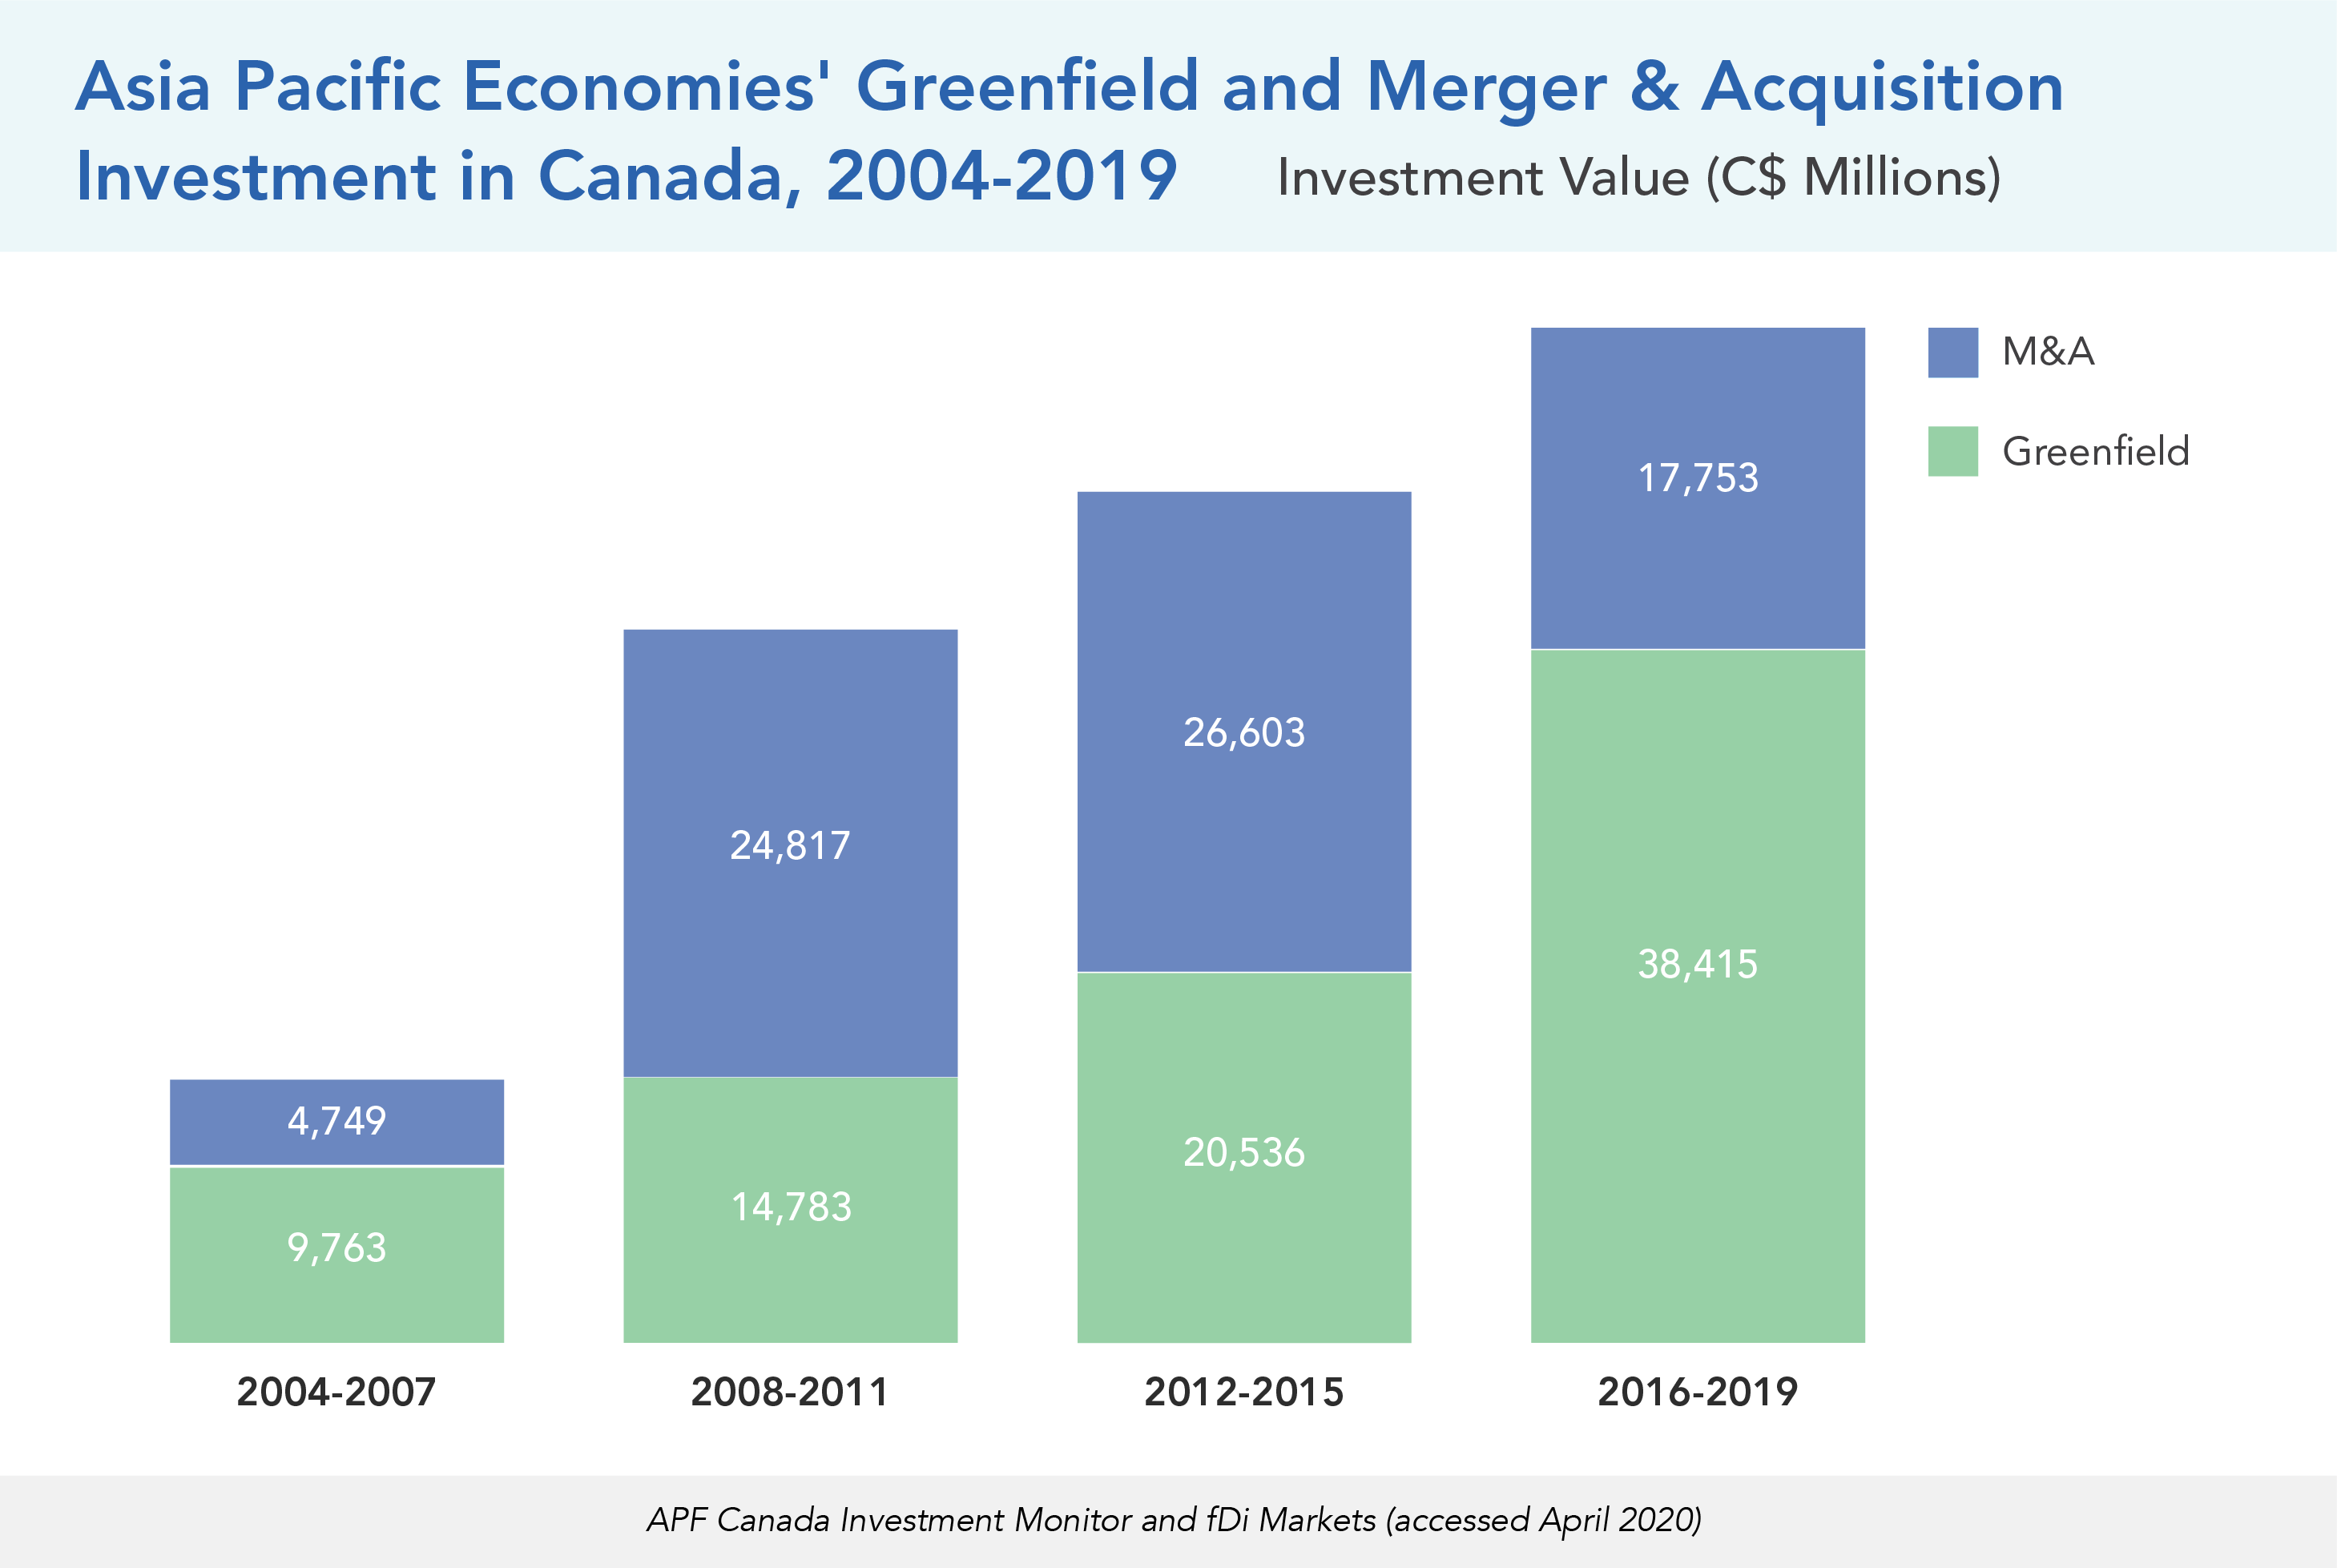 Asia Pacific Economies' Greenfield and Merger & Acquisition Investment in Canada, 2004-2019